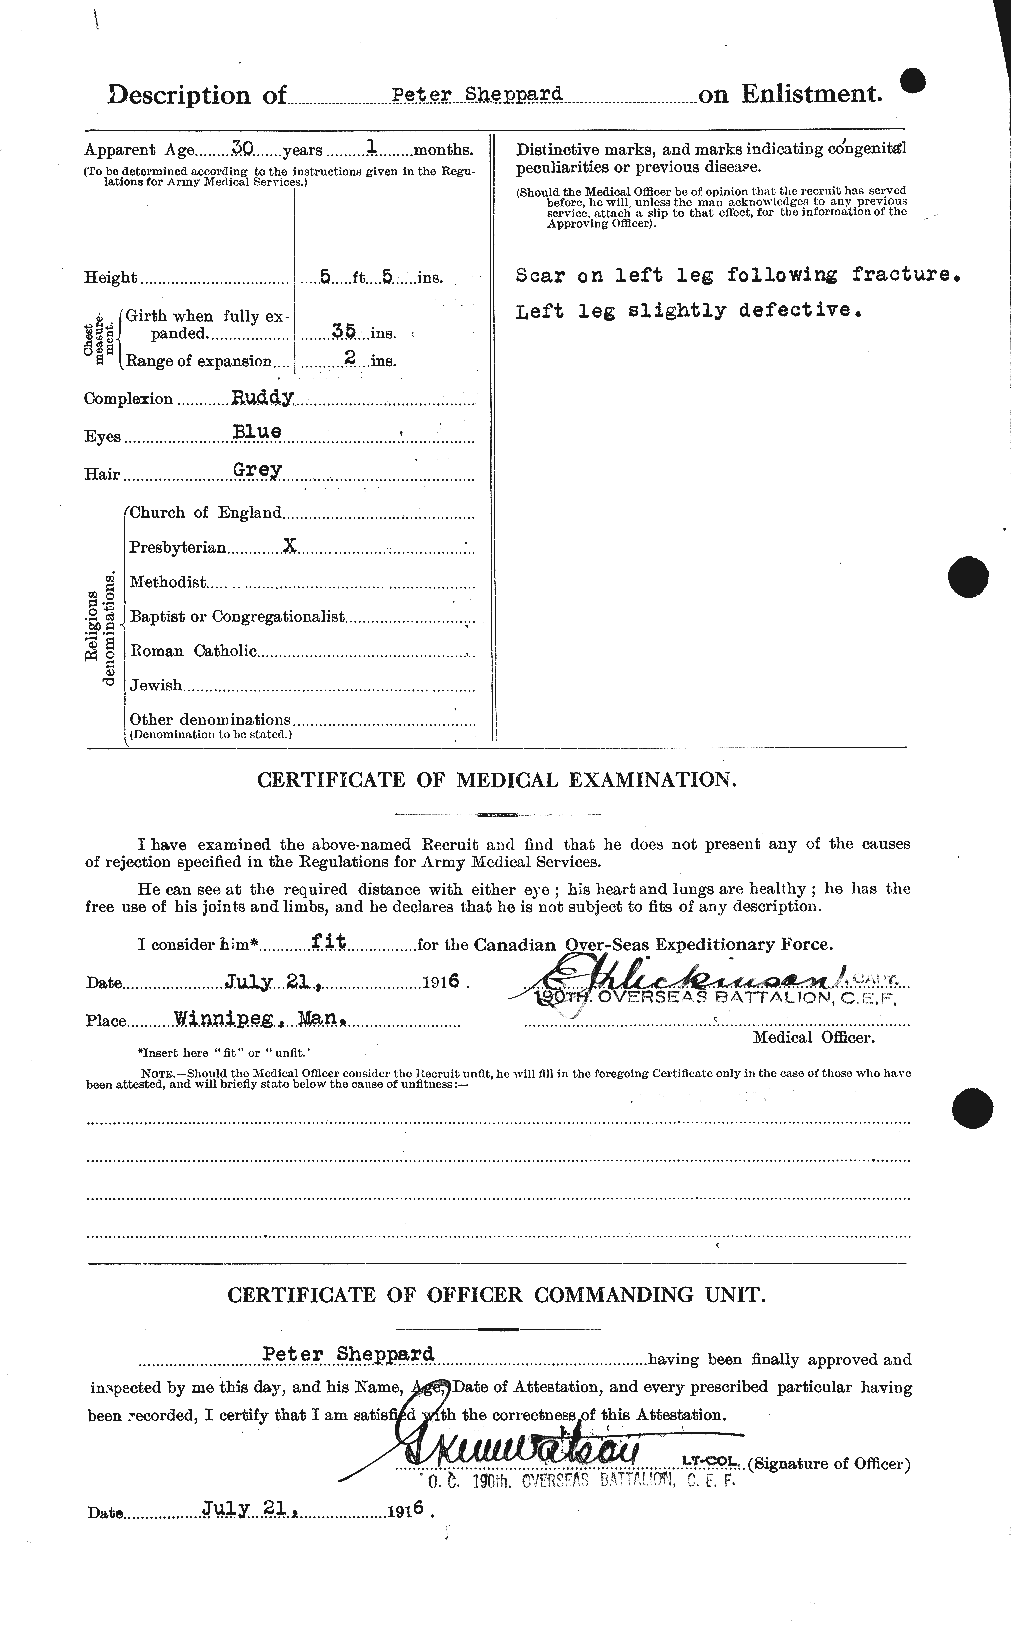 Personnel Records of the First World War - CEF 093475b